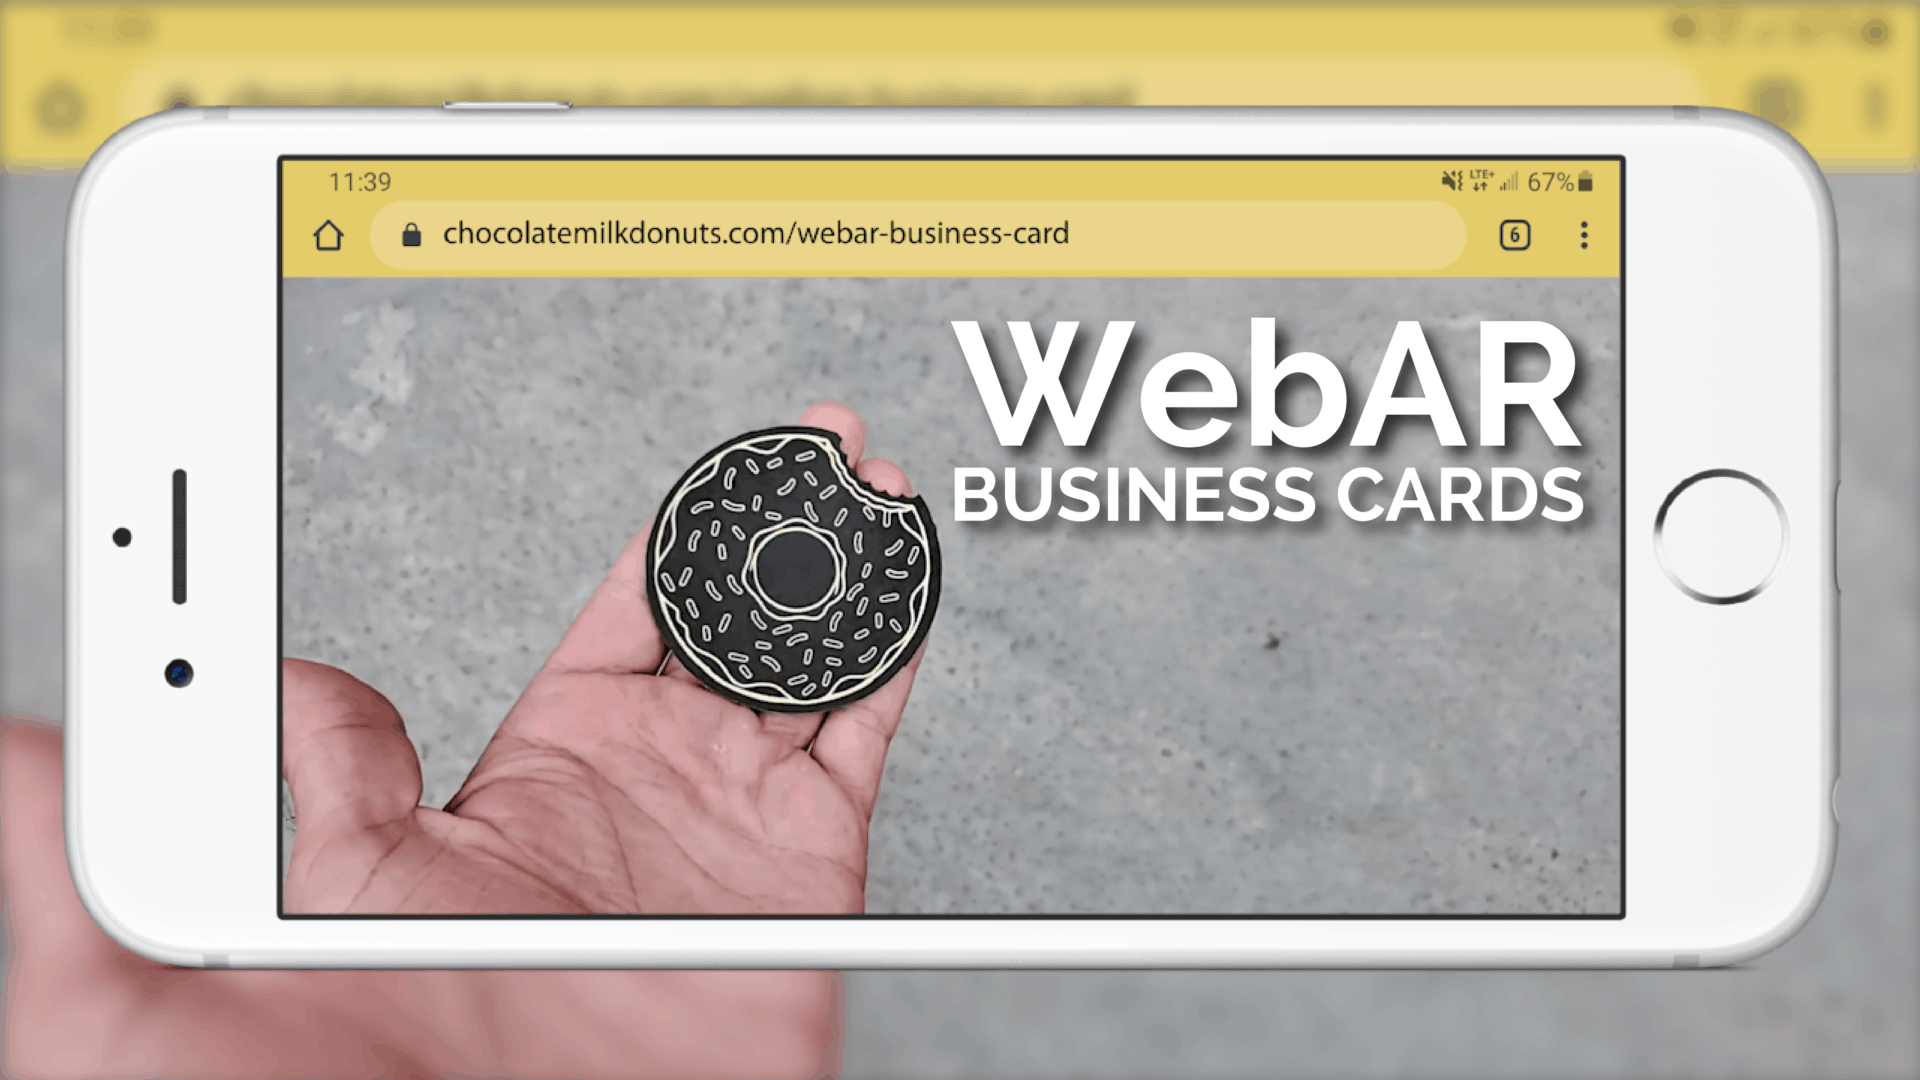 Thumbnail image for WebAR business cards video